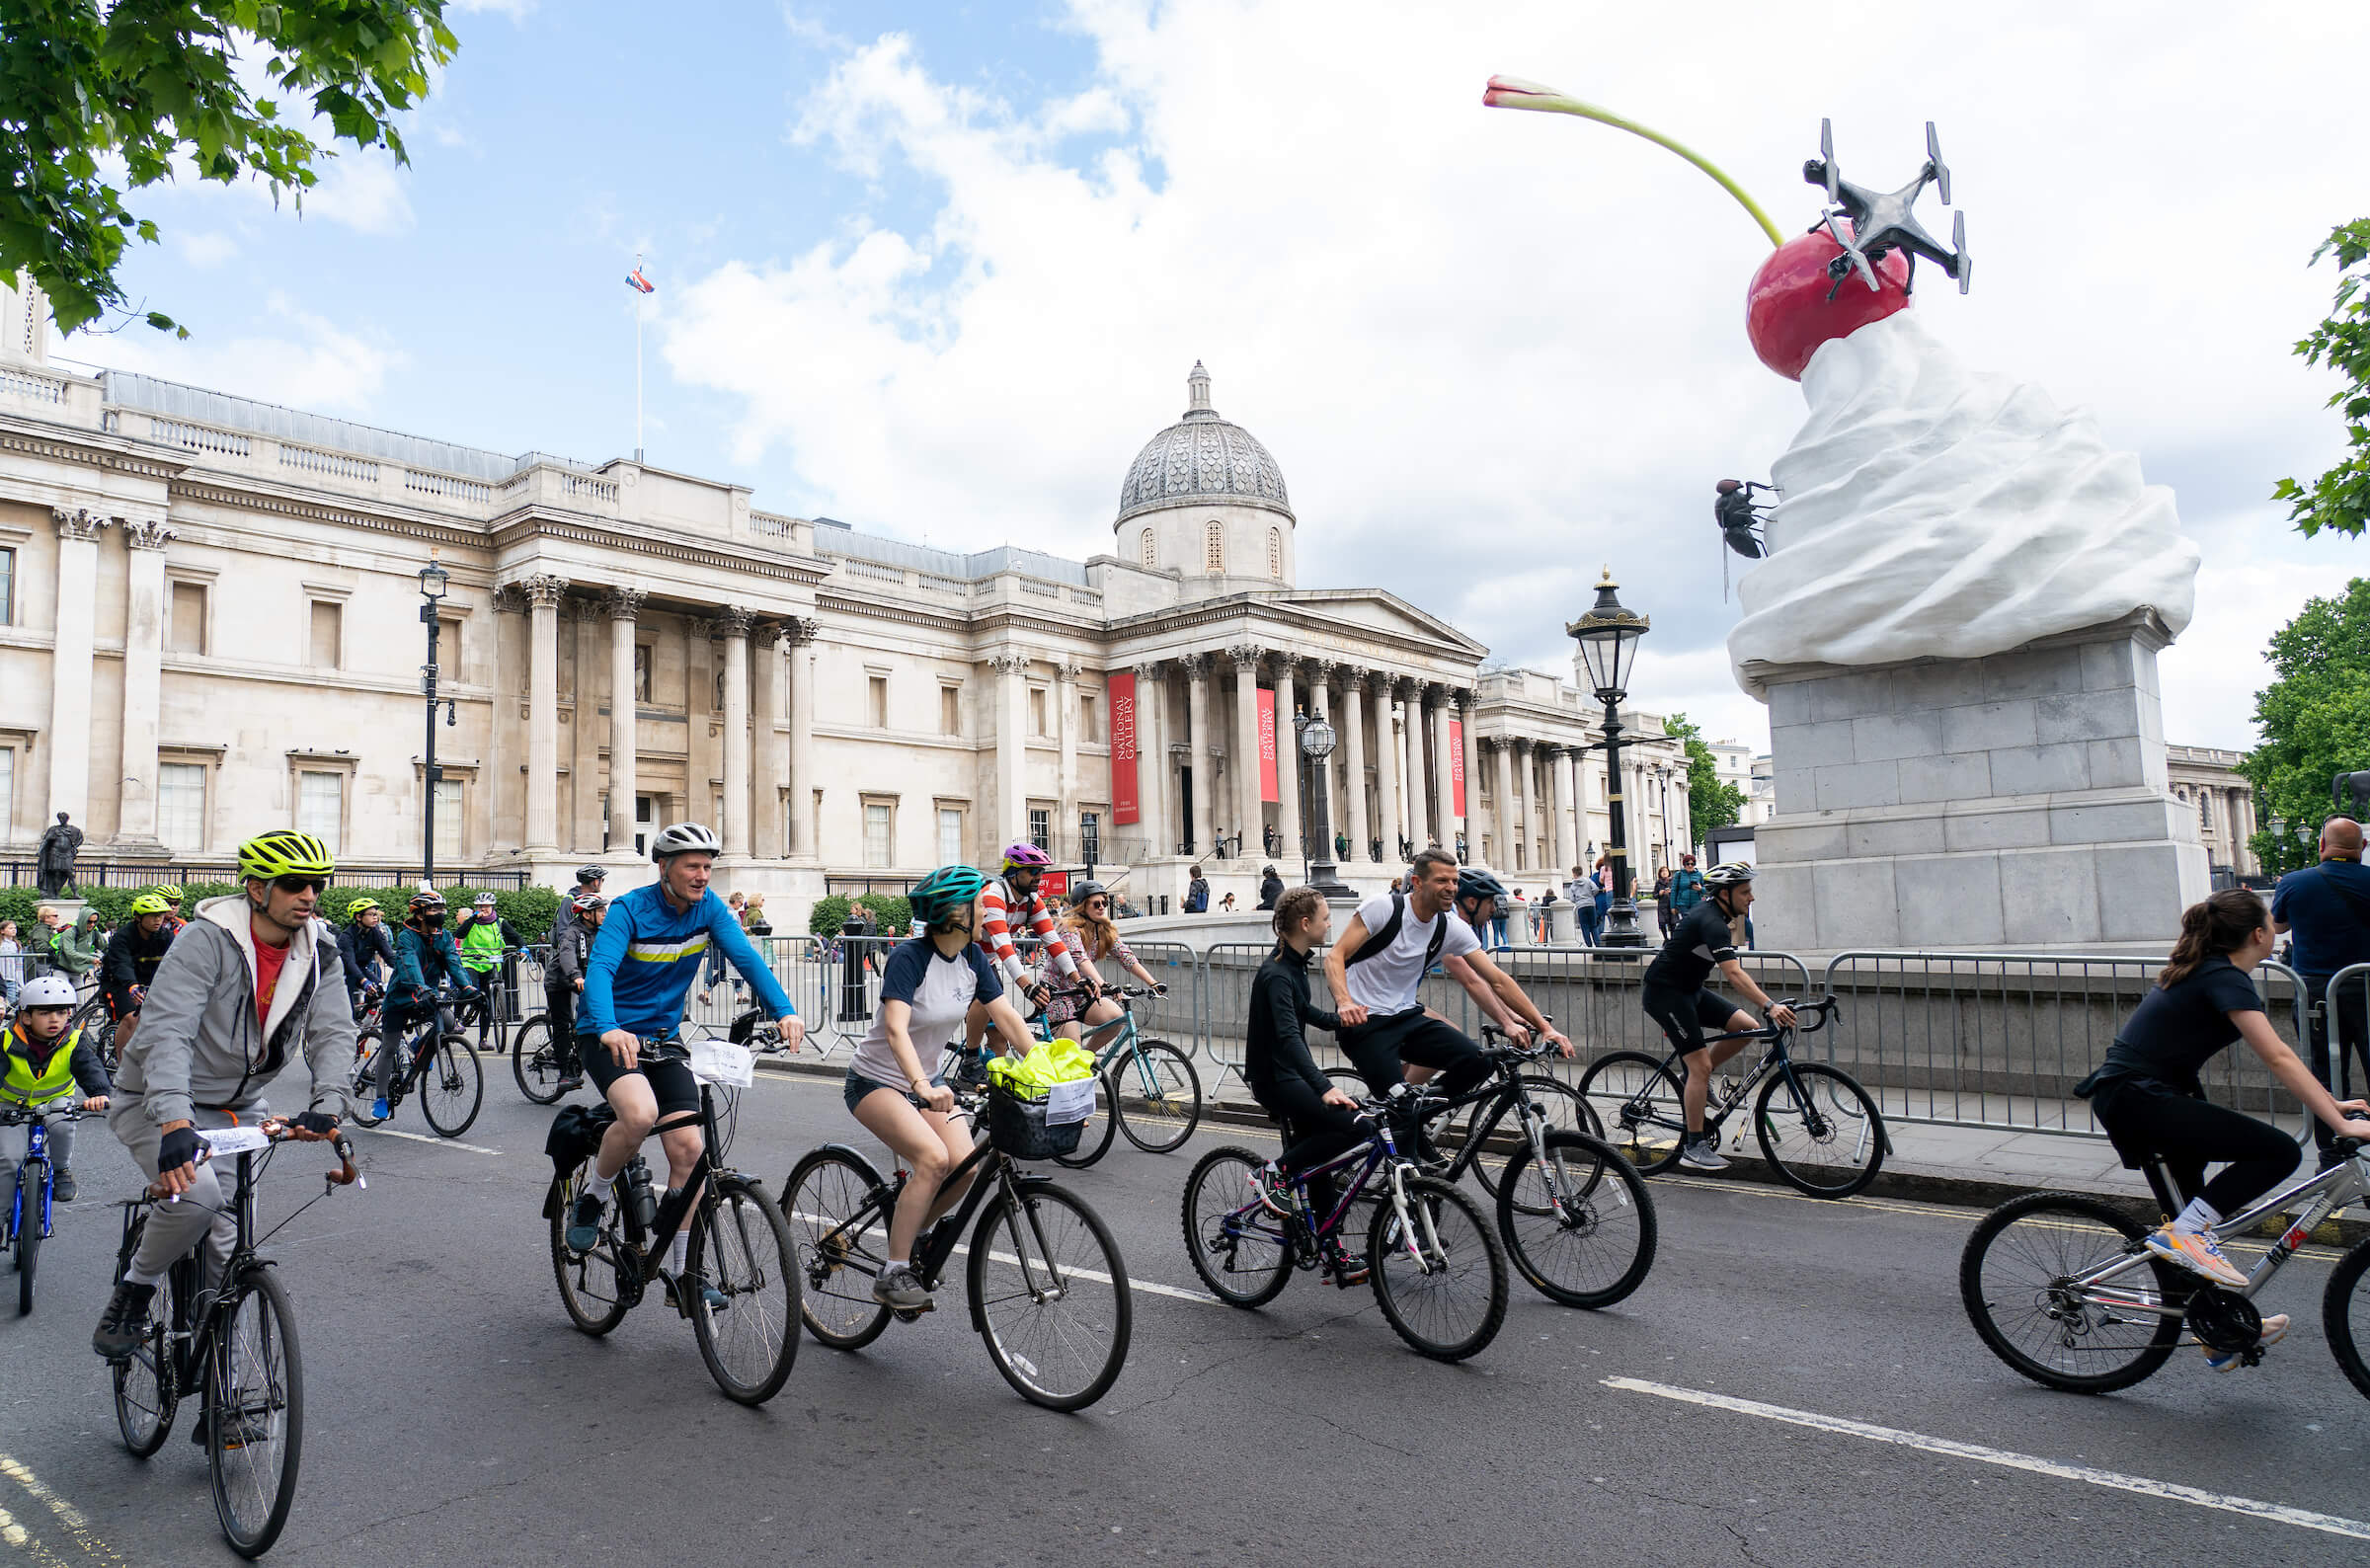 A group of cyclists ride past the National Gallery